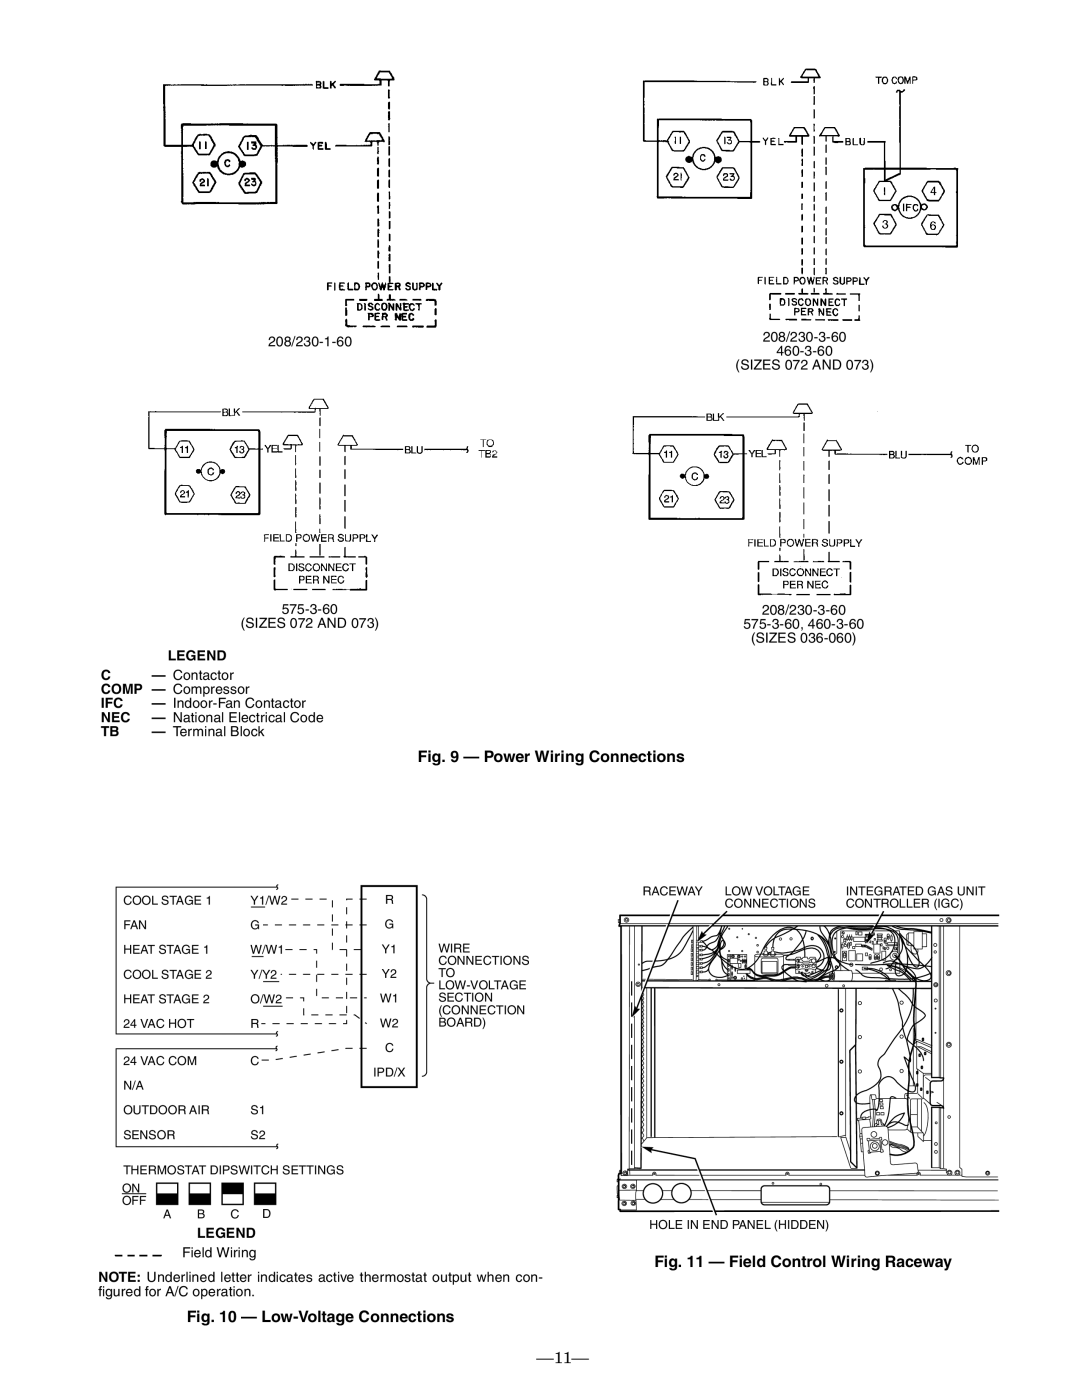 Bryant 580F installation instructions Power Wiring Connections, Field Control Wiring Raceway, Low-VoltageConnections 